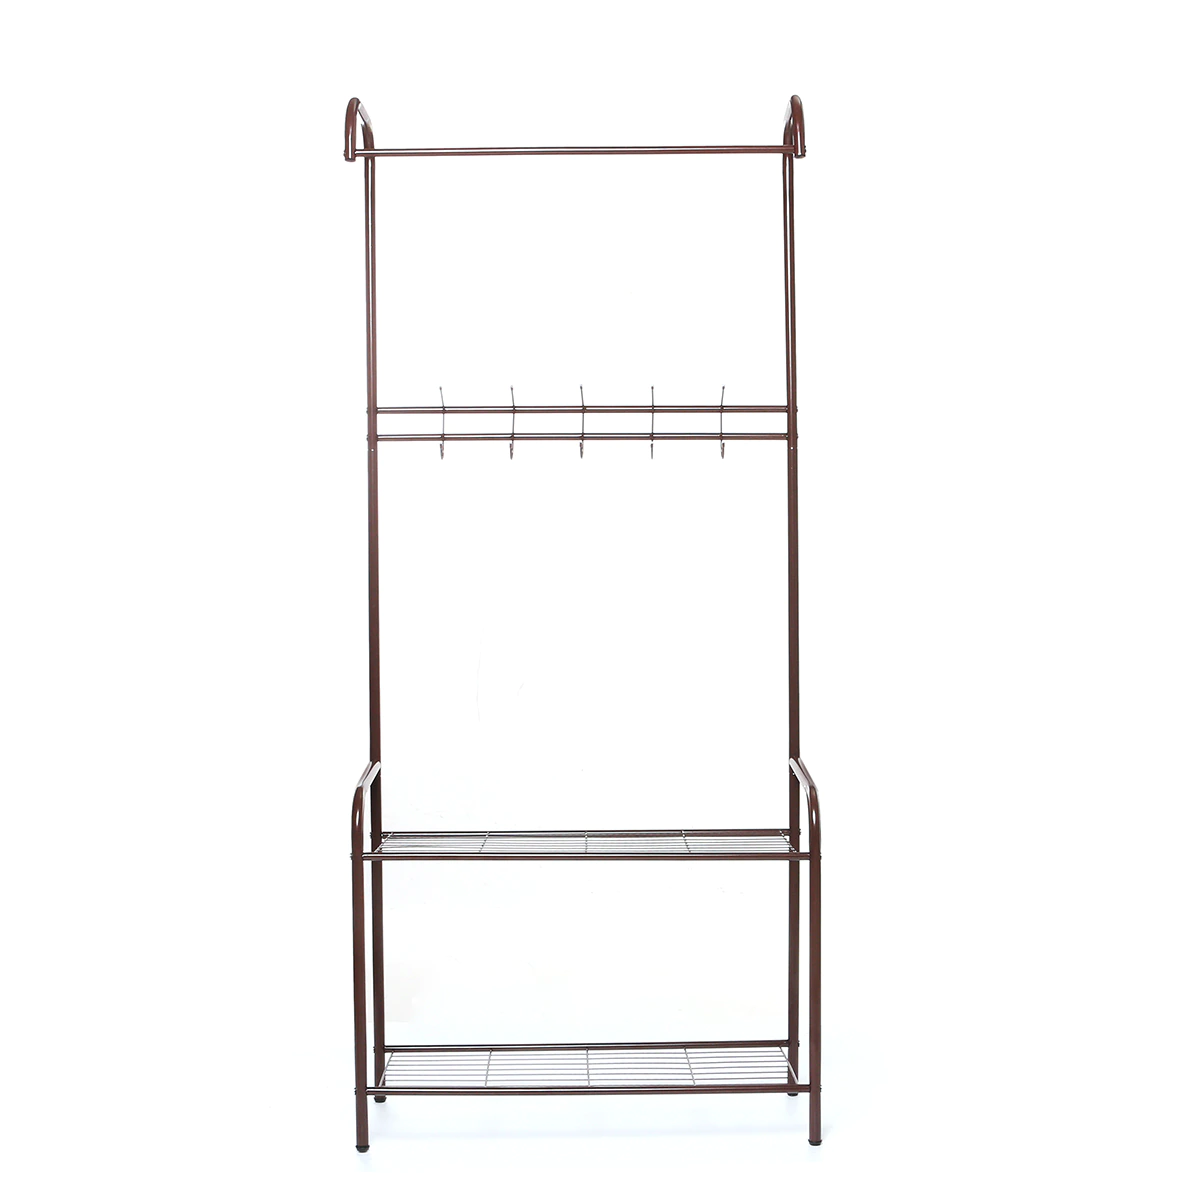 Multifunction Simple Clothes Holder Hanger Coat Rack Stainless Steel Floor Stand Coat Rack Clothes Rack Clothing Rack Furniture